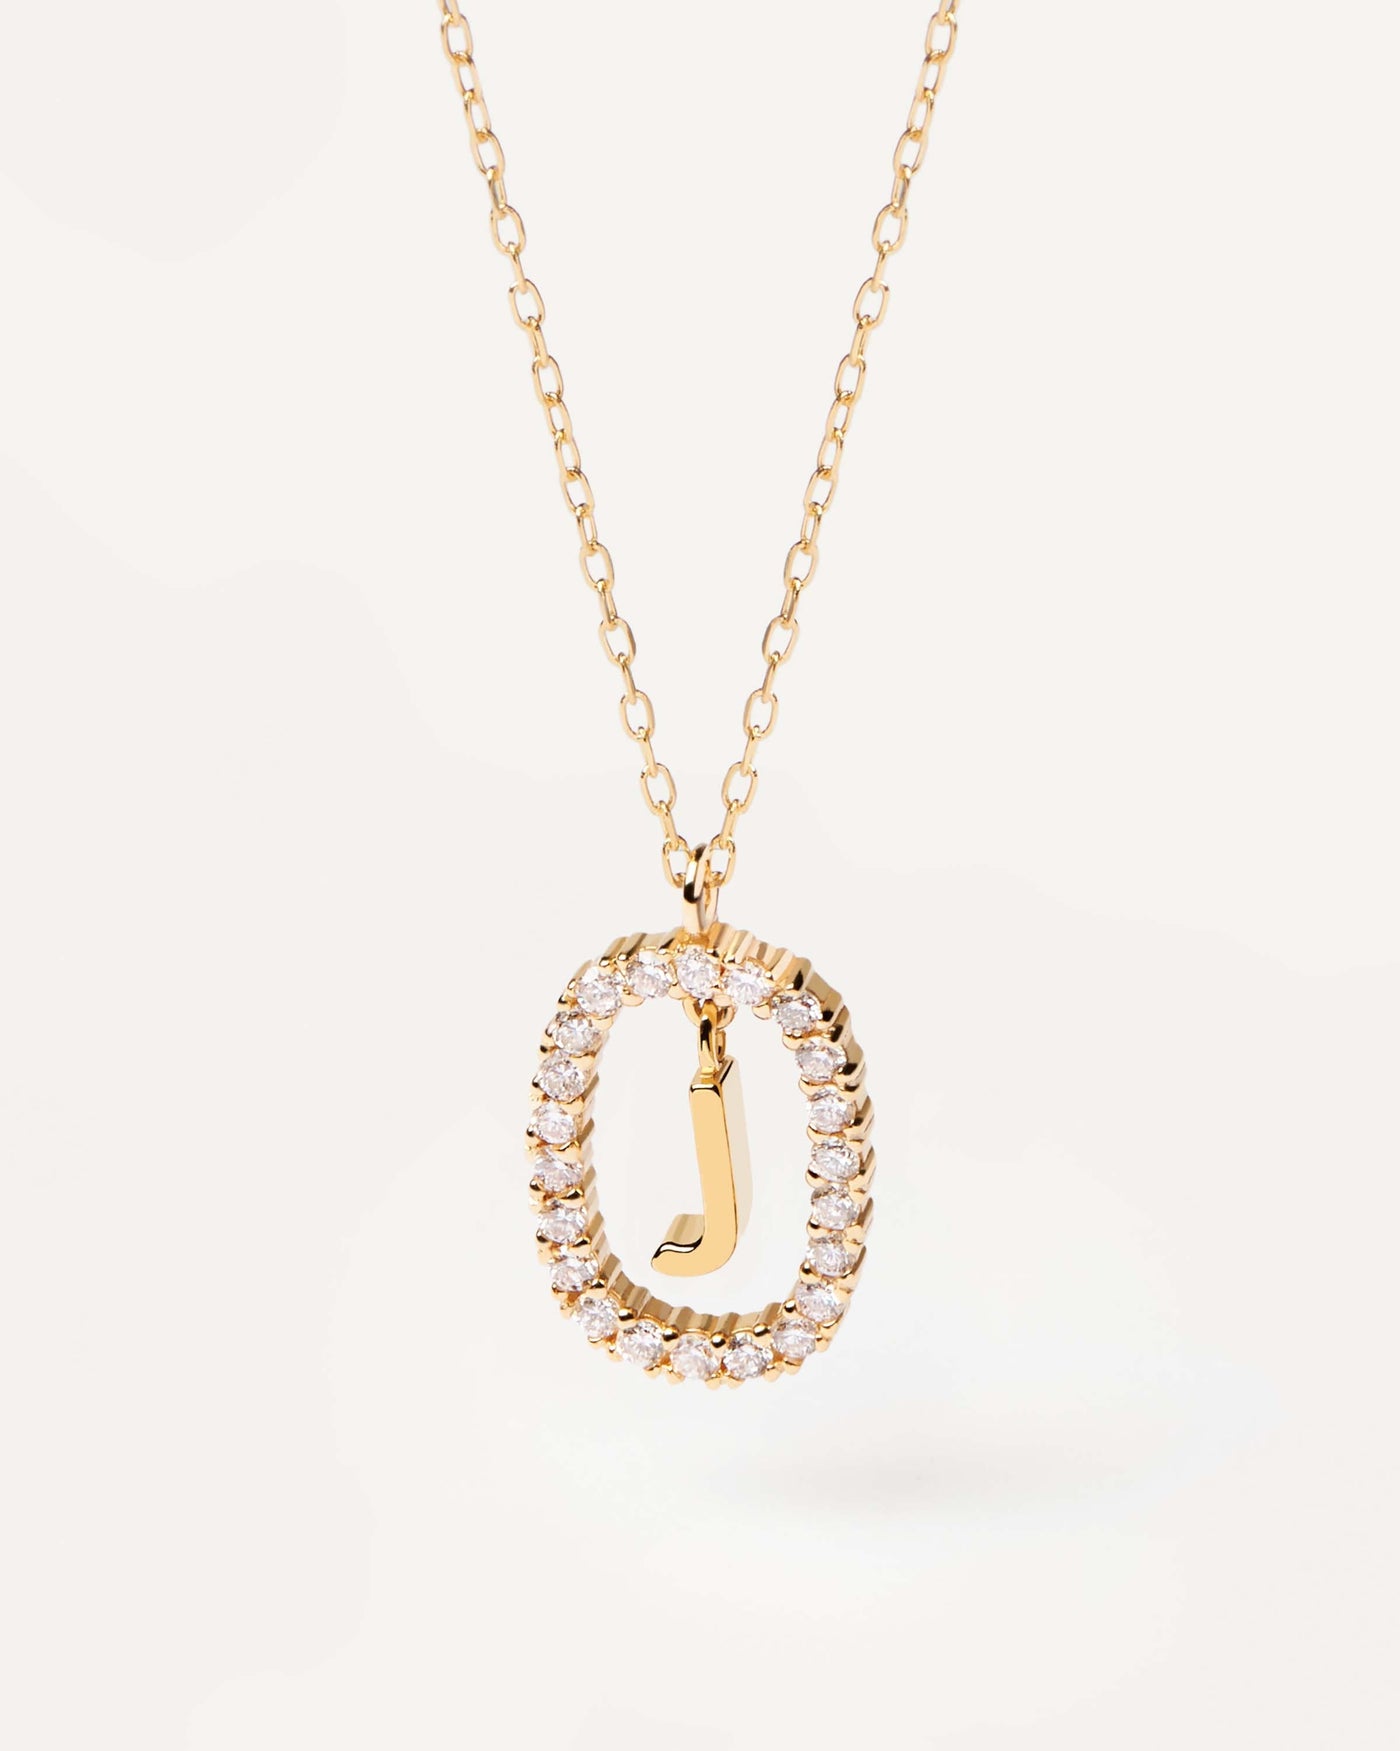 2023 Selection | Diamonds and Gold Letter J Necklace. Initial J necklace in solid yellow gold, circled by 0.33 carats lab-grown diamonds. Get the latest arrival from PDPAOLA. Place your order safely and get this Best Seller. Free Shipping.